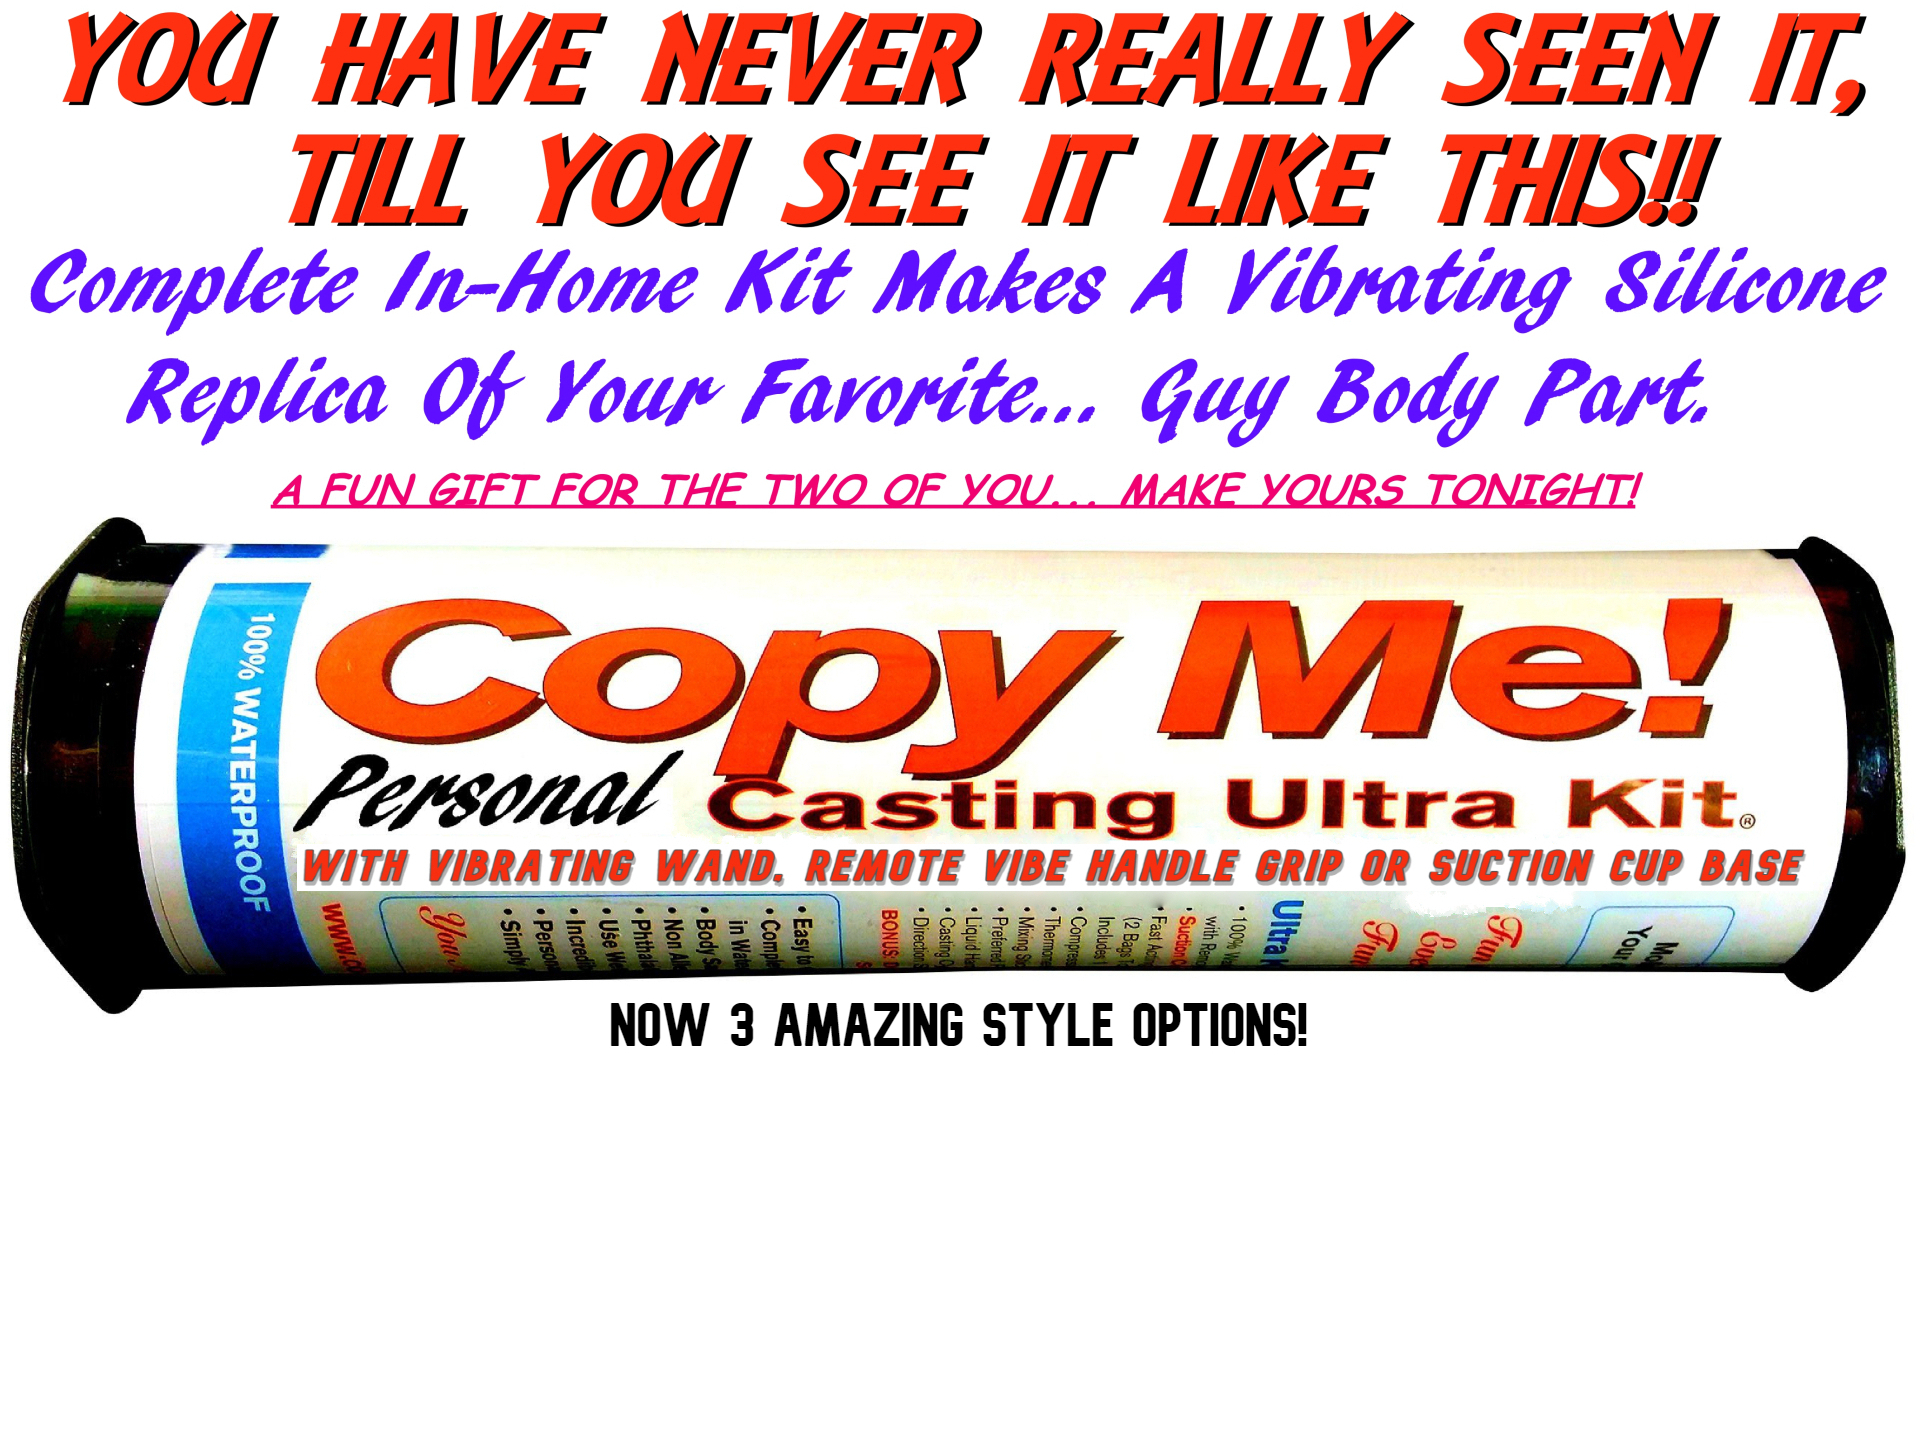 Copy Me! Penis Casting Ultra Kits #1 In-Home Mold System Patented Vibrating Dildo Duplicate Sex Toy You Create Copymekits pic